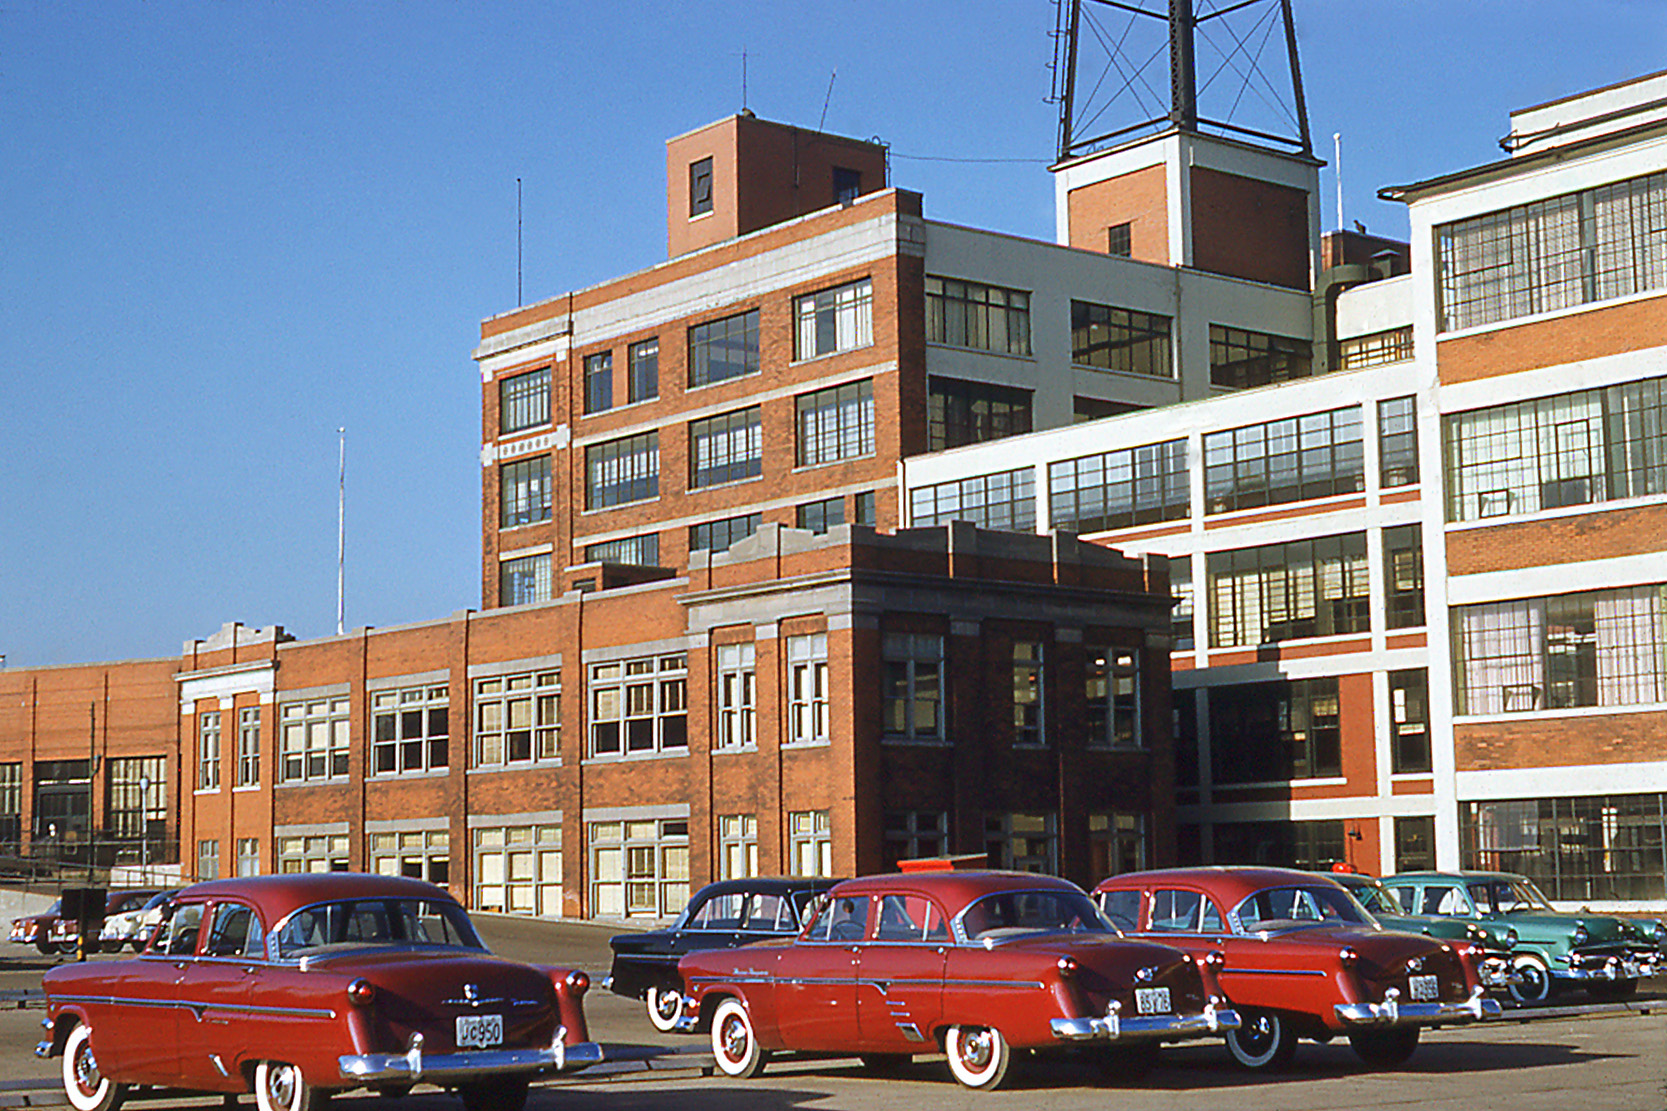 My father took this Kodachrome in Ford Plant 1 in Windsor, Ontario, in 1954. The history of Ford here goes back to 1904 when Model Bs and Cs, and later Model Ts, were built in this complex. The plant was located right alongside the Detroit River at Riverside Drive East and Drouillard Road. The two storey building in the foreground was built in 1912 as office space, and as Ford expanded more offices were installed in the buildings behind. This is where my father worked in management. To see a present day view click here. A photo by the Detroit Publishing Co. of this area in 1914 can be viewed here, and here is a story on the demolition in 1969. View full size.